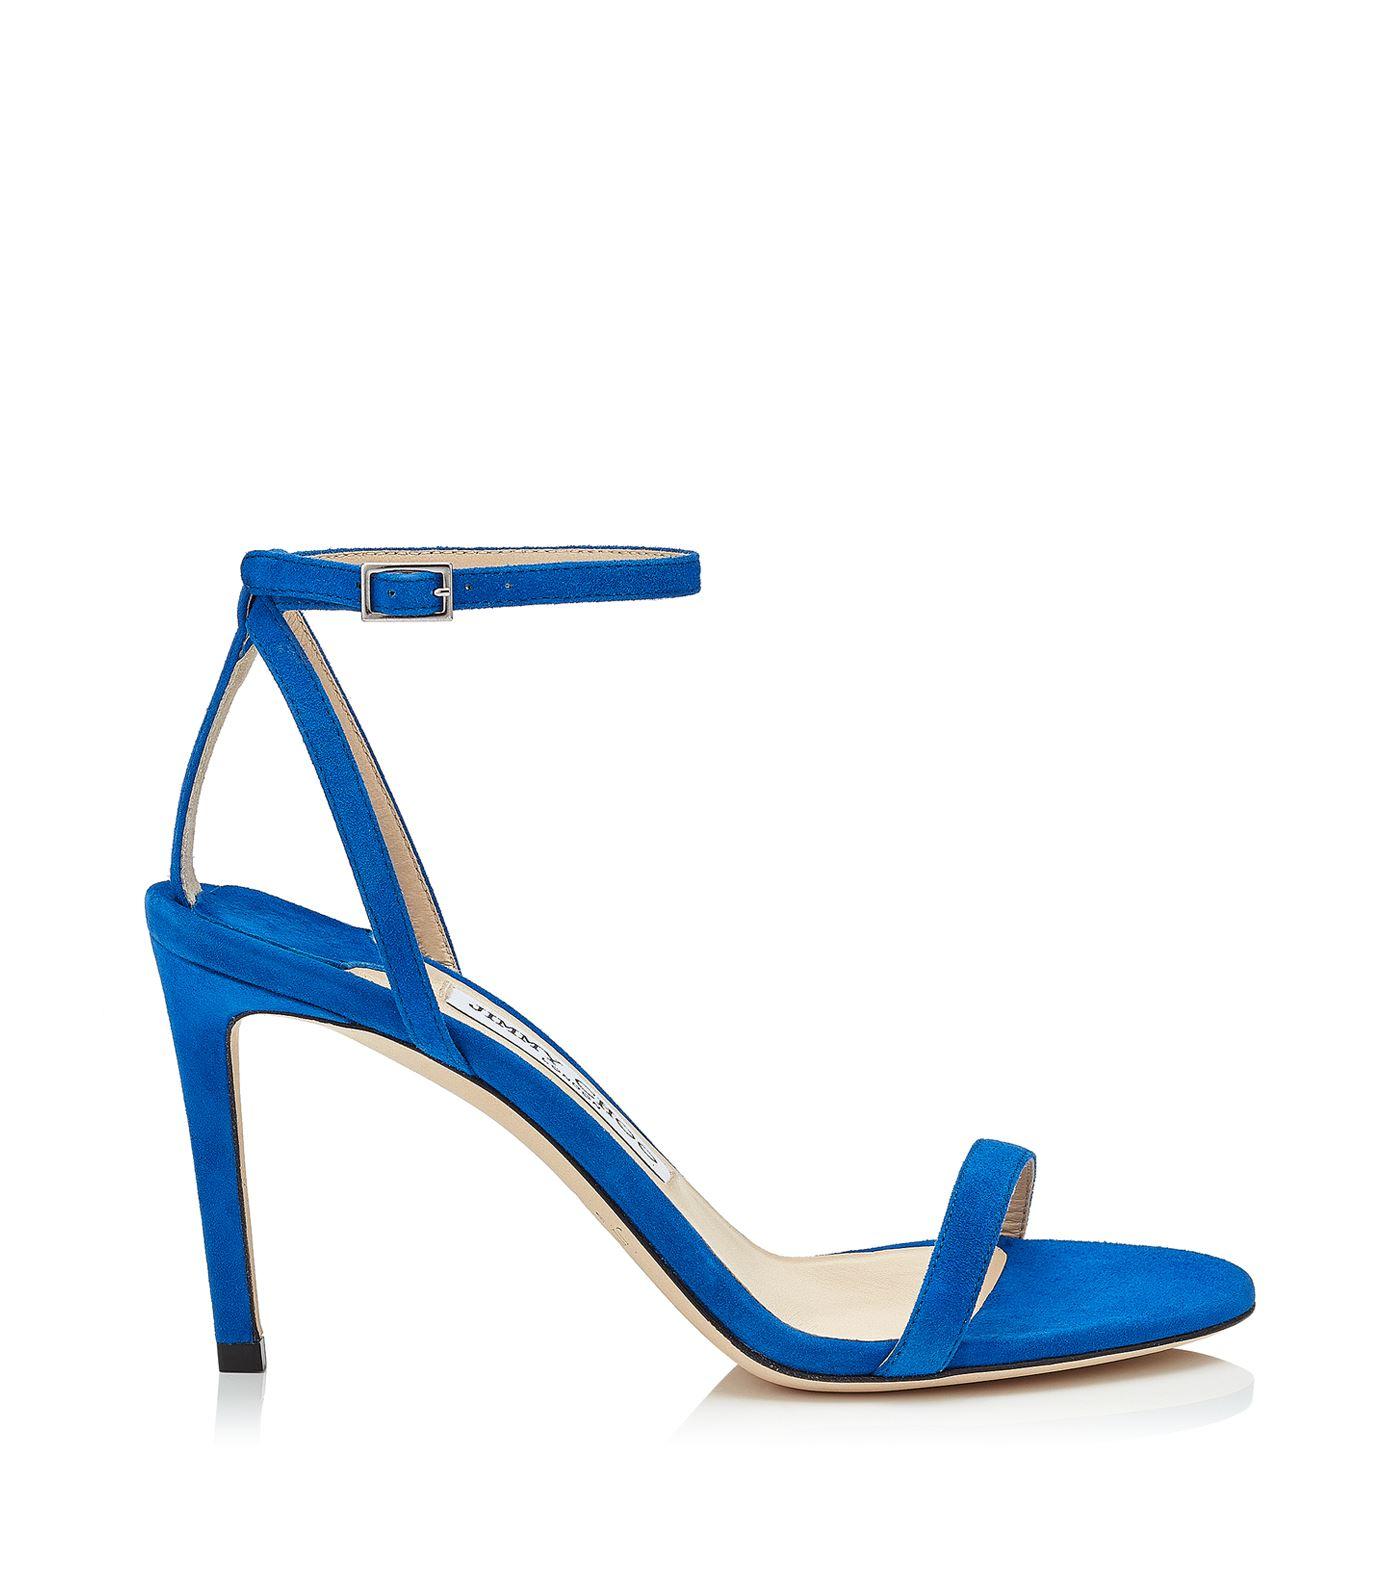 Jimmy Choo Minny Strappy Suede Sandals in Electric Blue (Blue) - Save 6 ...